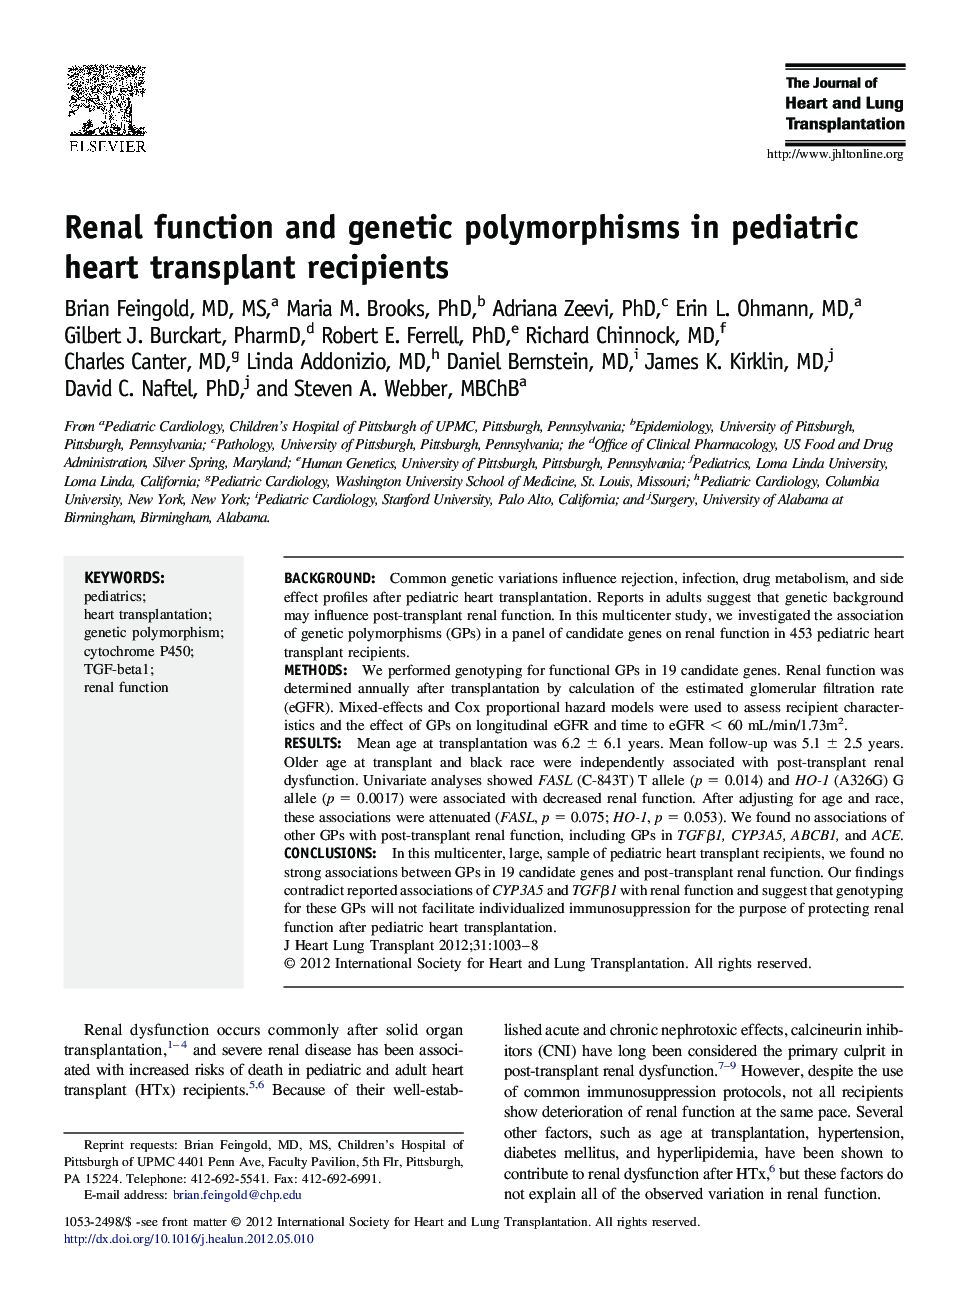 Renal function and genetic polymorphisms in pediatric heart transplant recipients